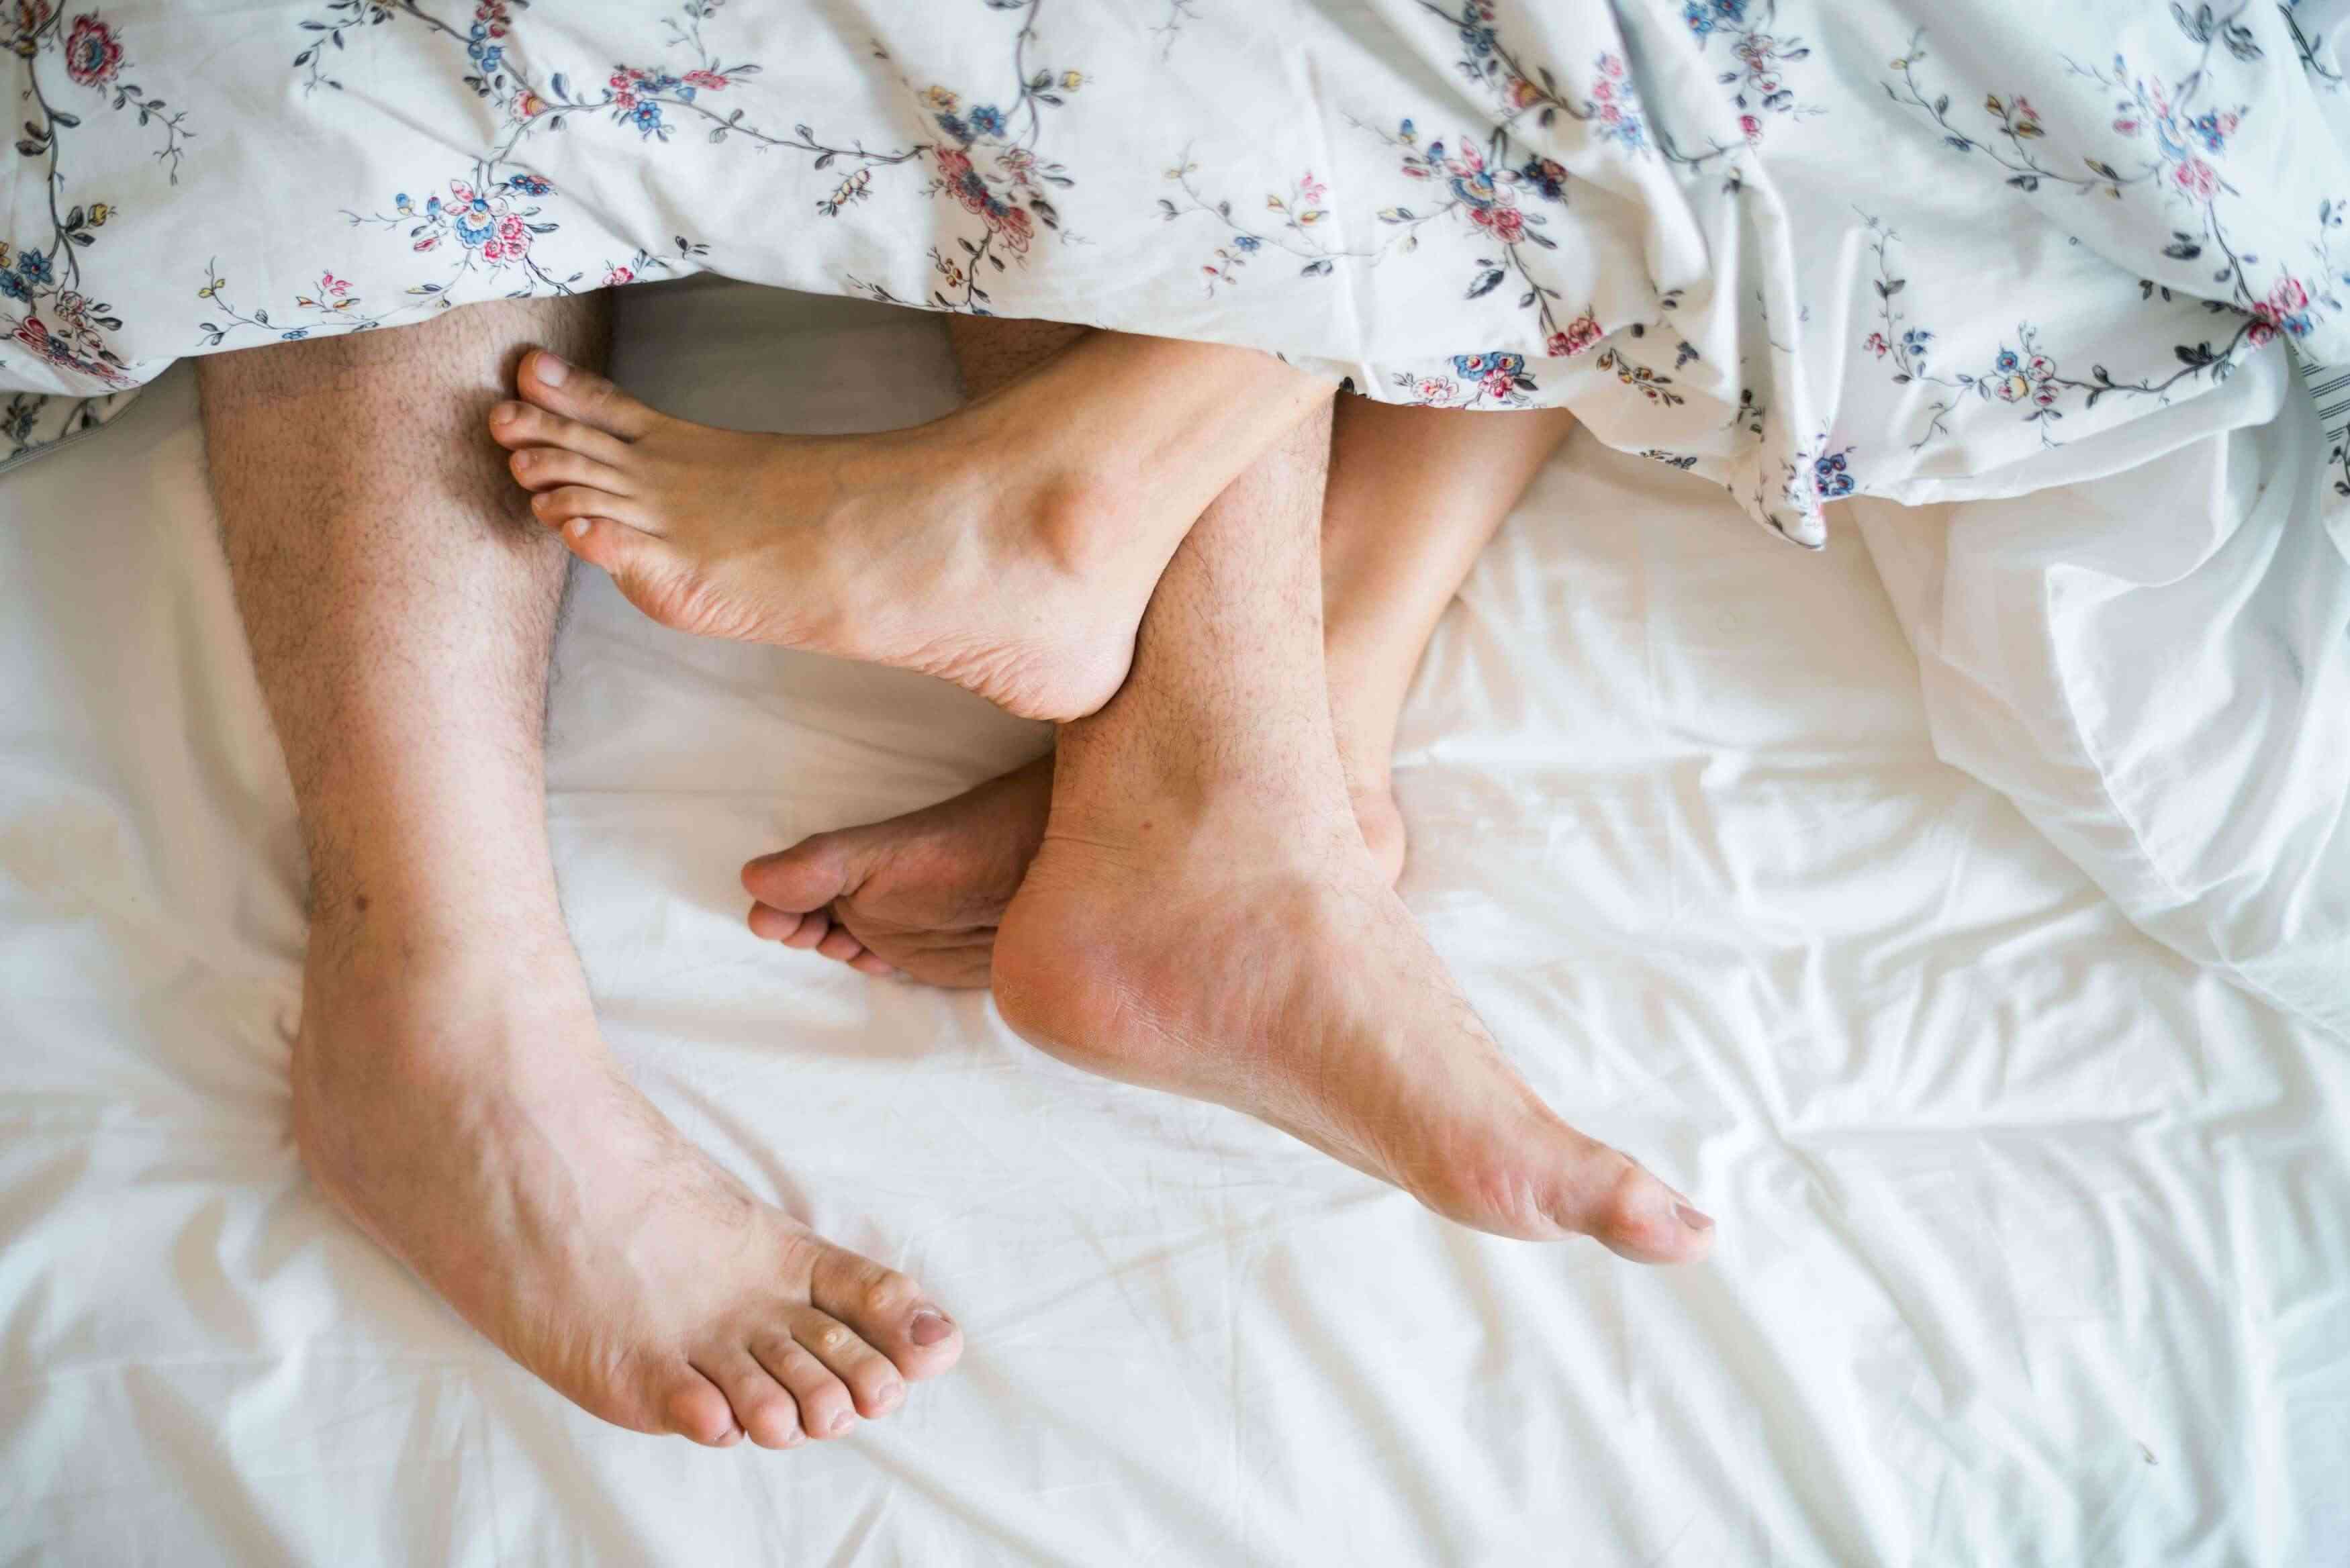 Consider These 12 Kinky Things To Try If You Want A More Fulfilling Sex Life Regain